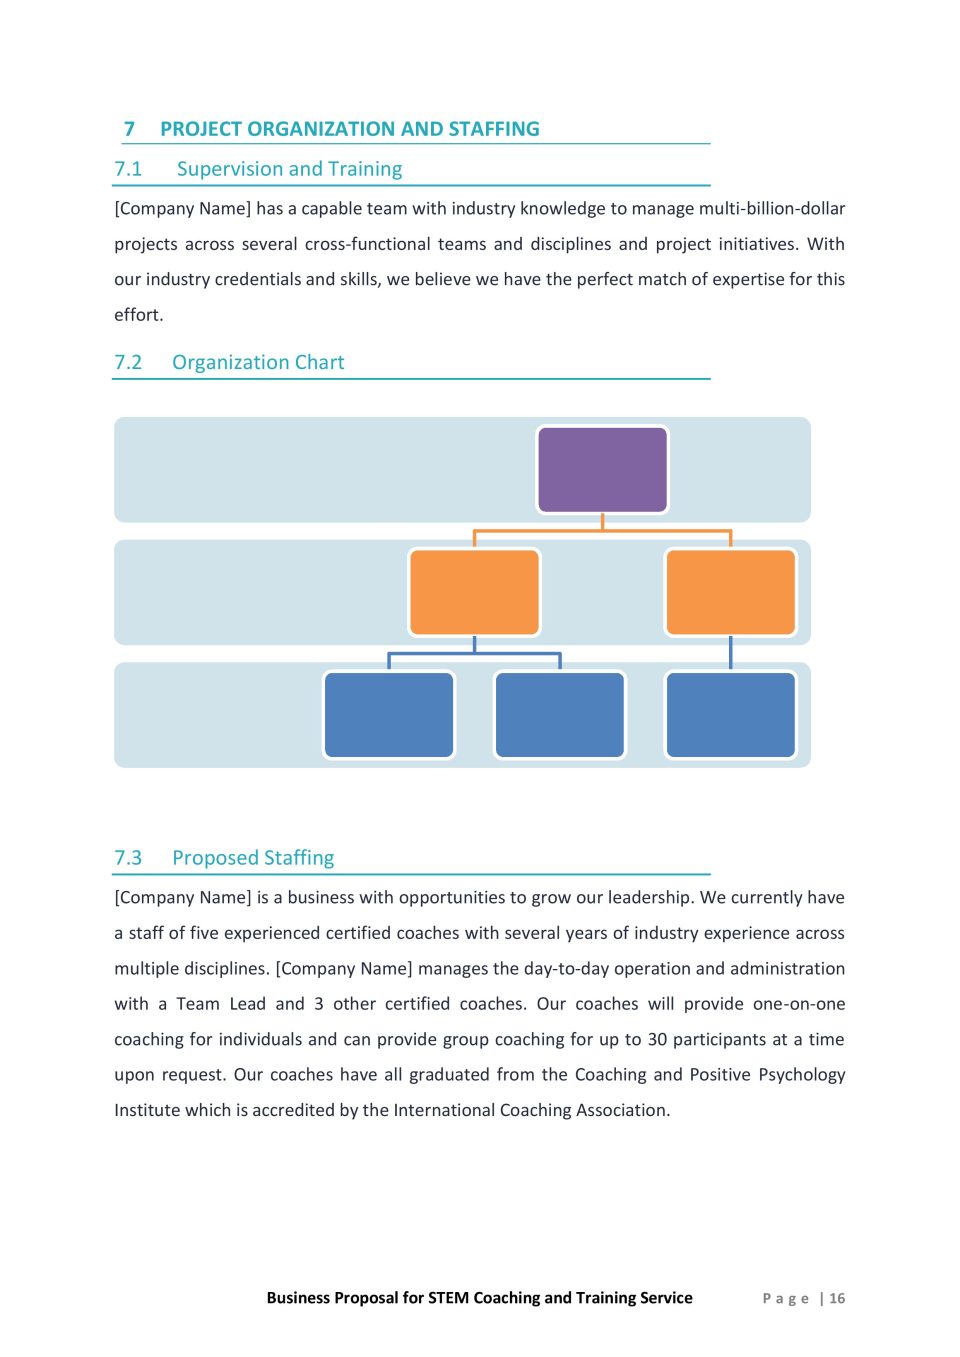 STEM Coaching and Training Service Proposal Template 16 scaled